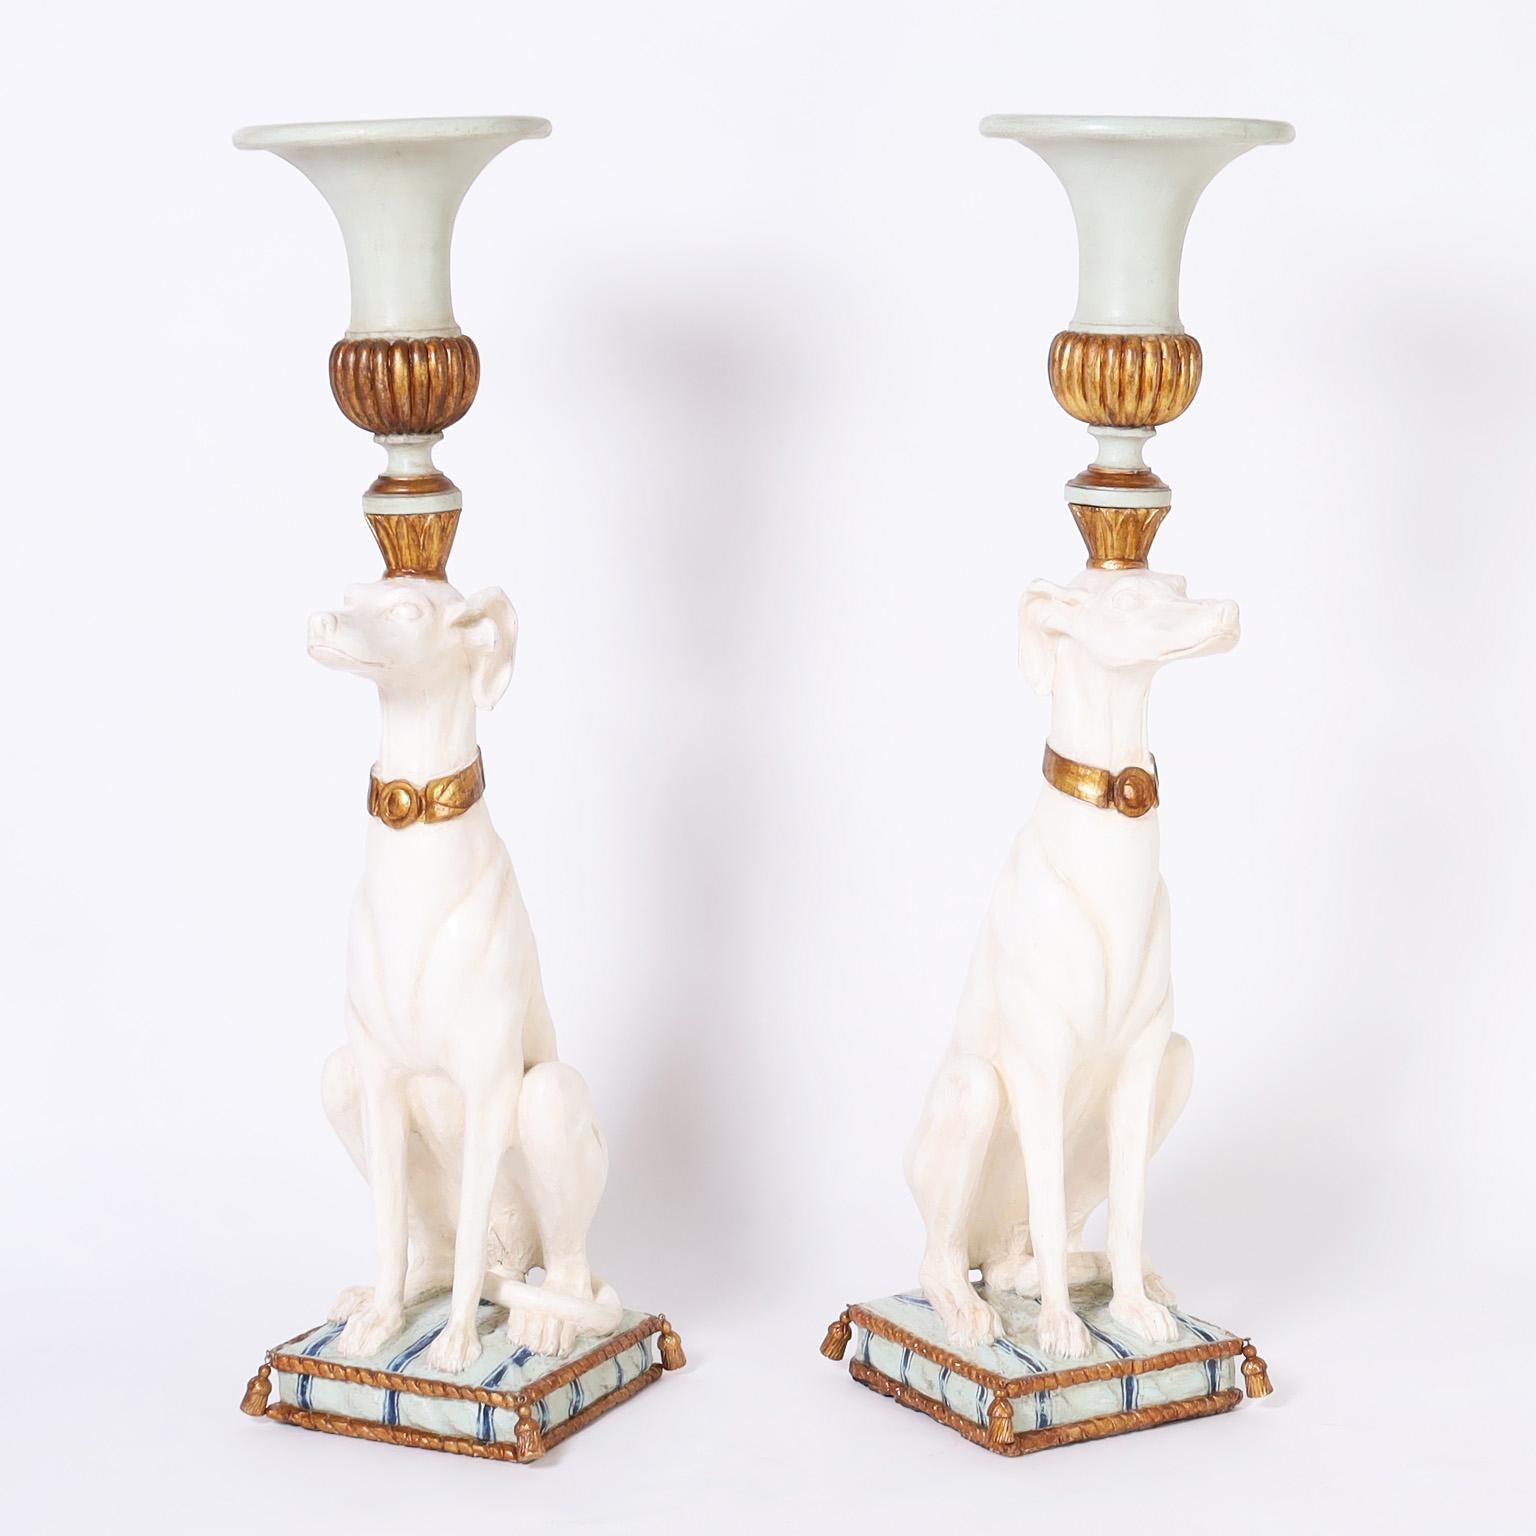 Rococo Pair of Antique Italian Parcel Gilt Carved Wood Whippets with Urns For Sale